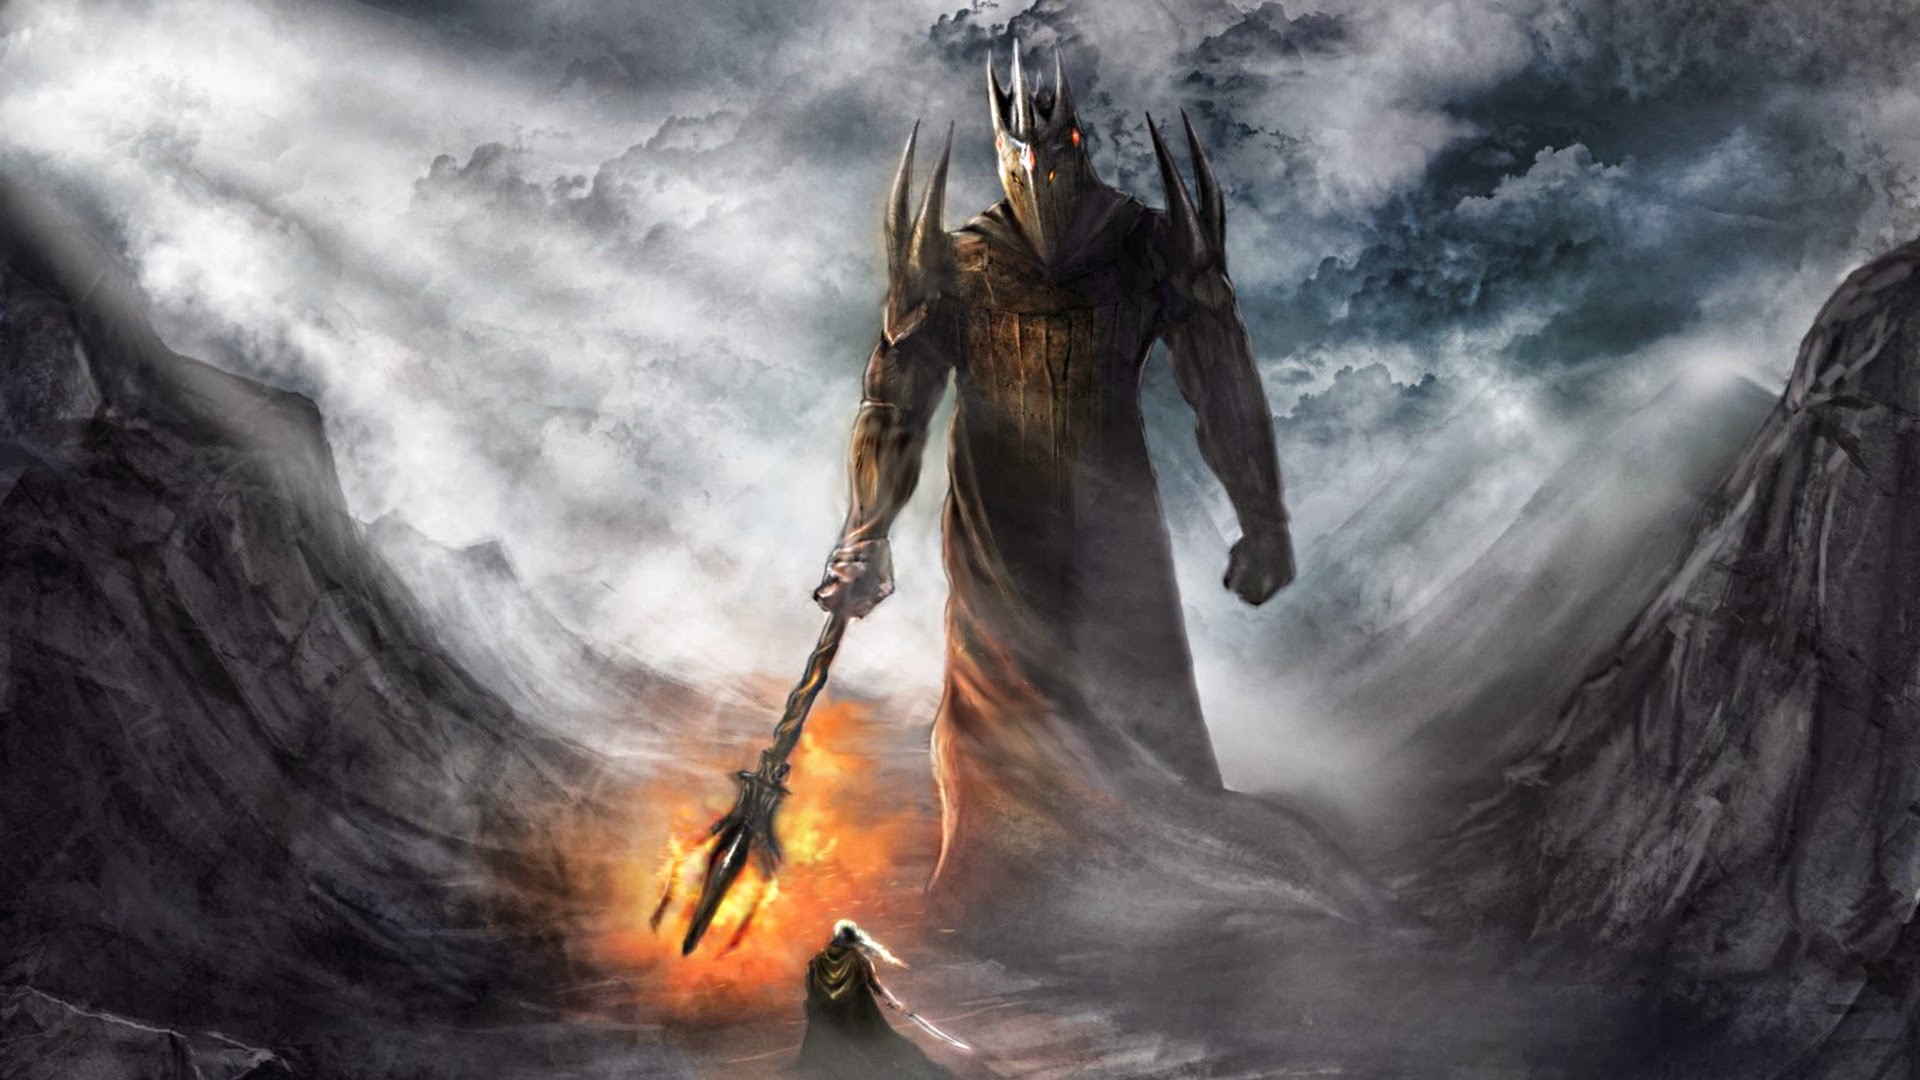 Fantasy Art The Lord Of The Rings Morgoth J R R Tolkien Fingolfin 1920x1080